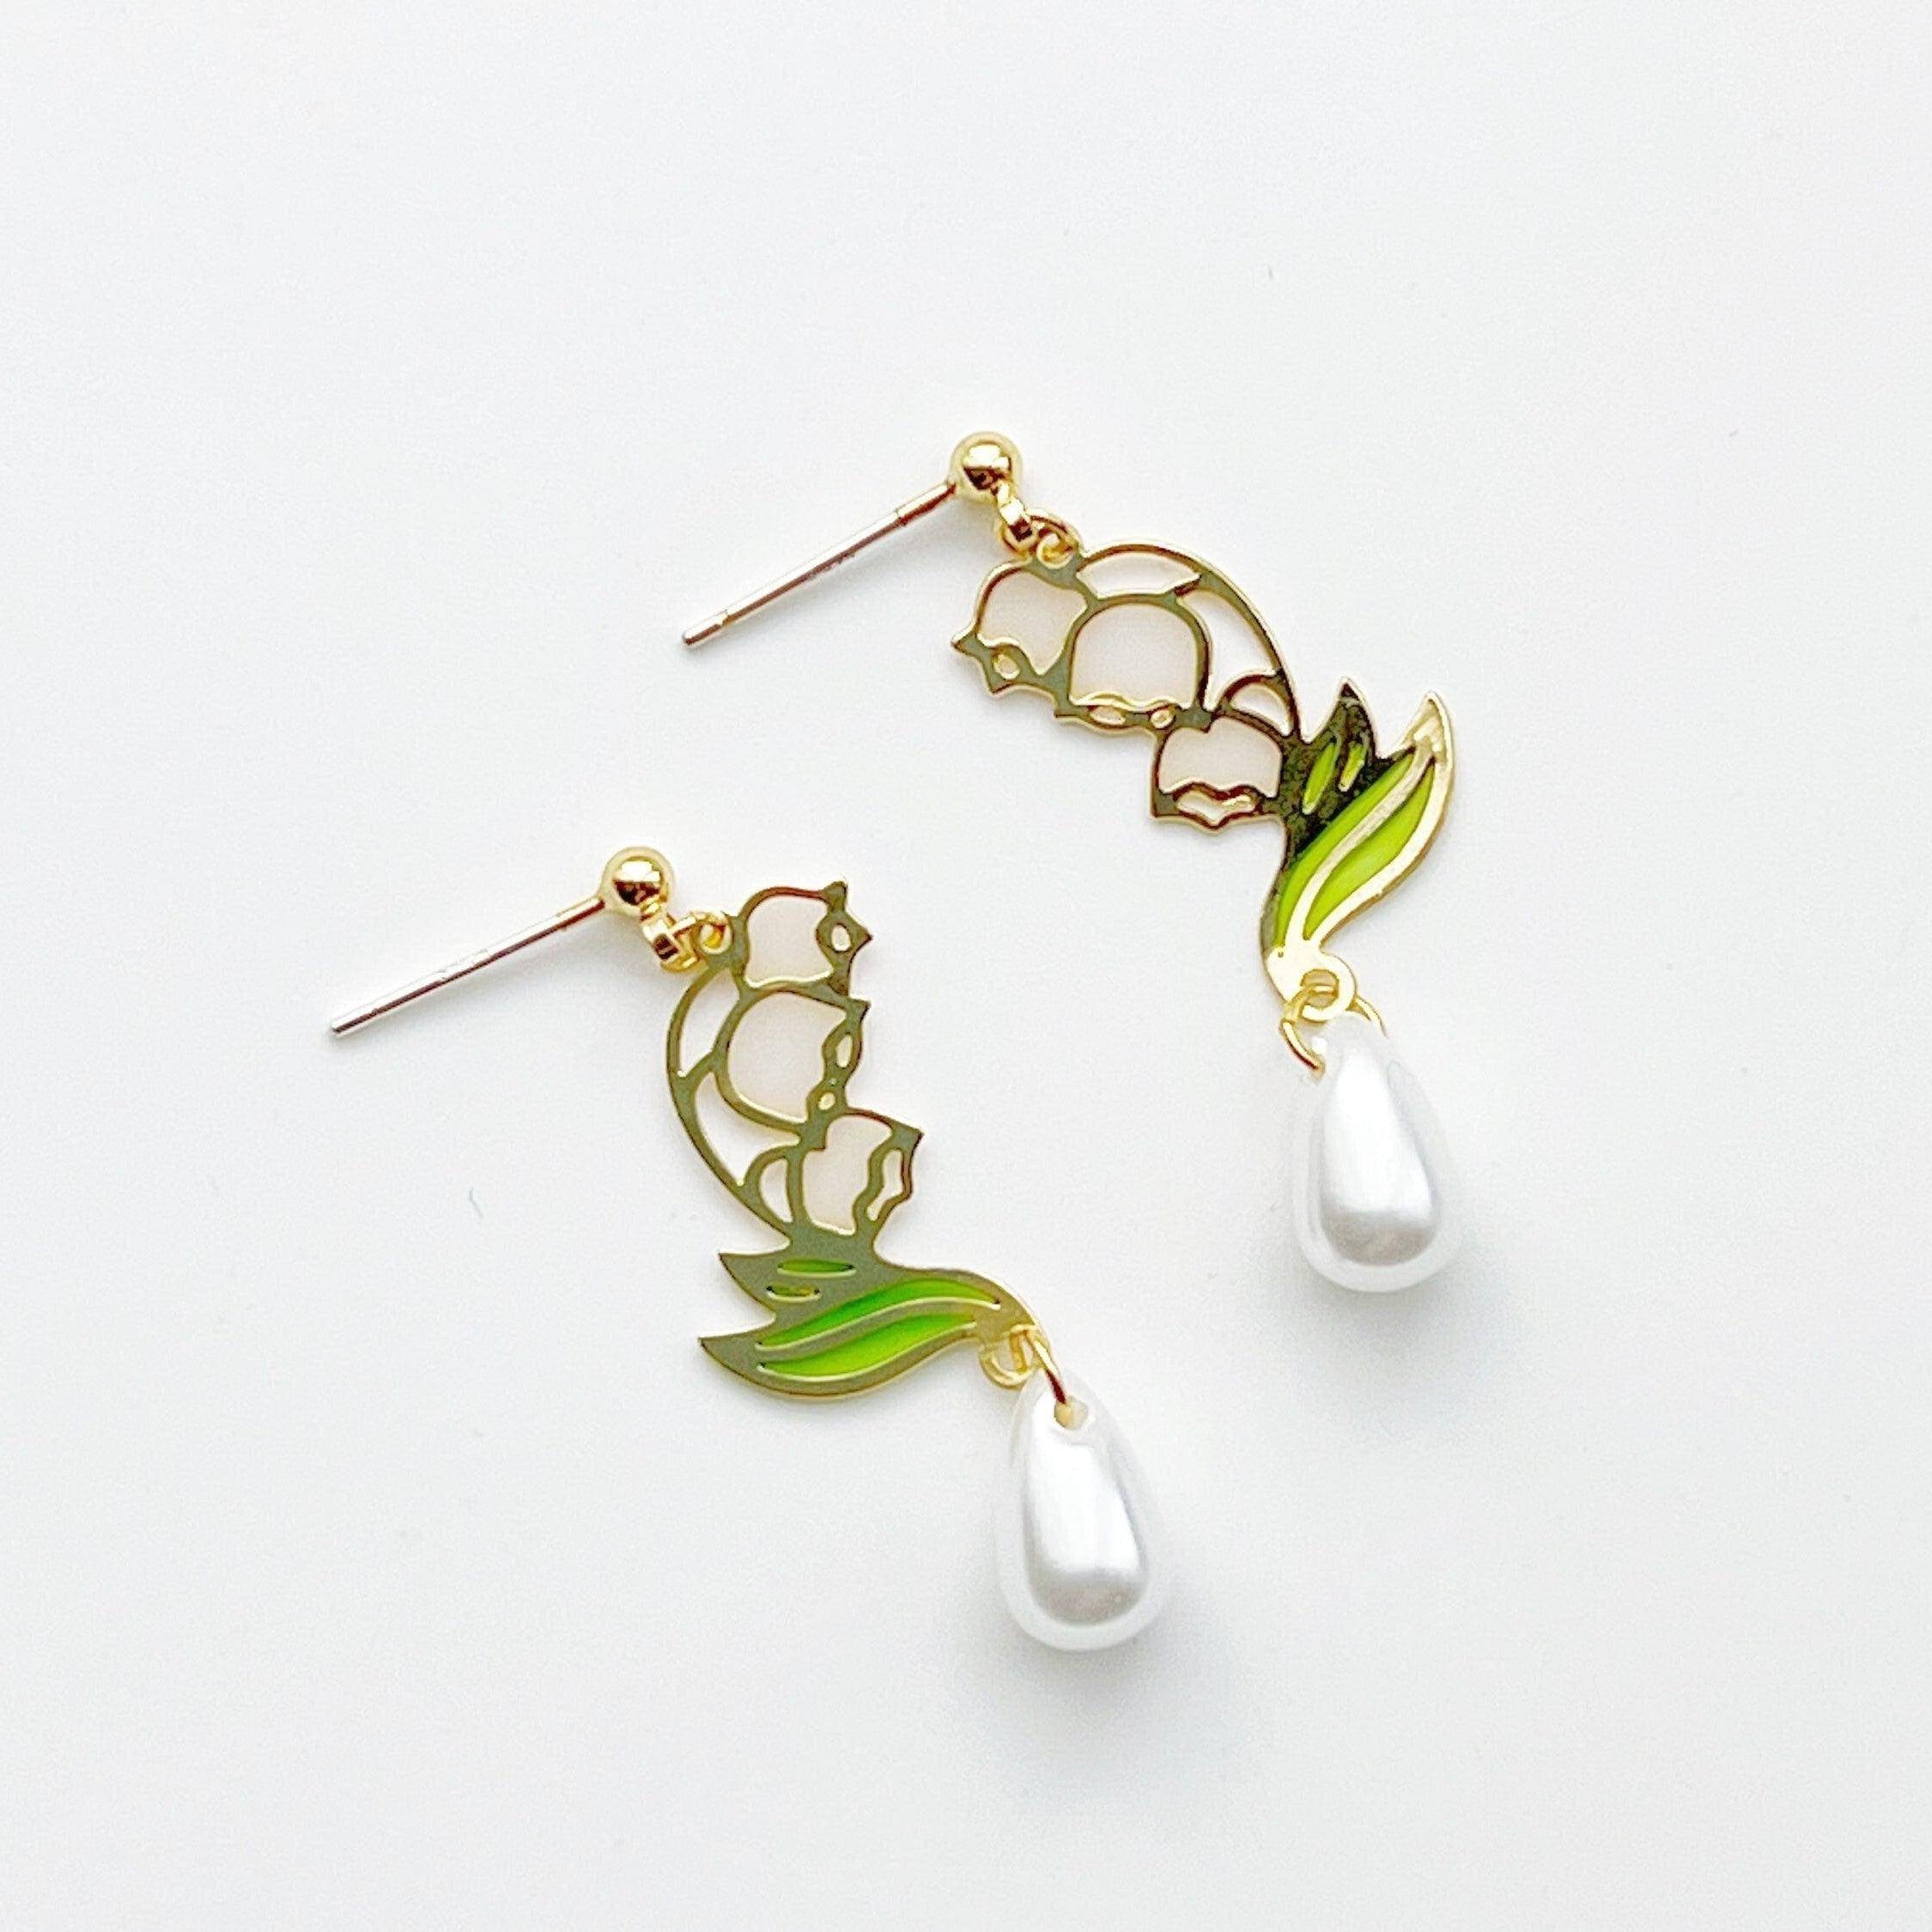 Lily of the Valley Earrings - White Bell Shape Flower Drop Earrings - Jewelry & Watches - Bijou Her -  -  - 